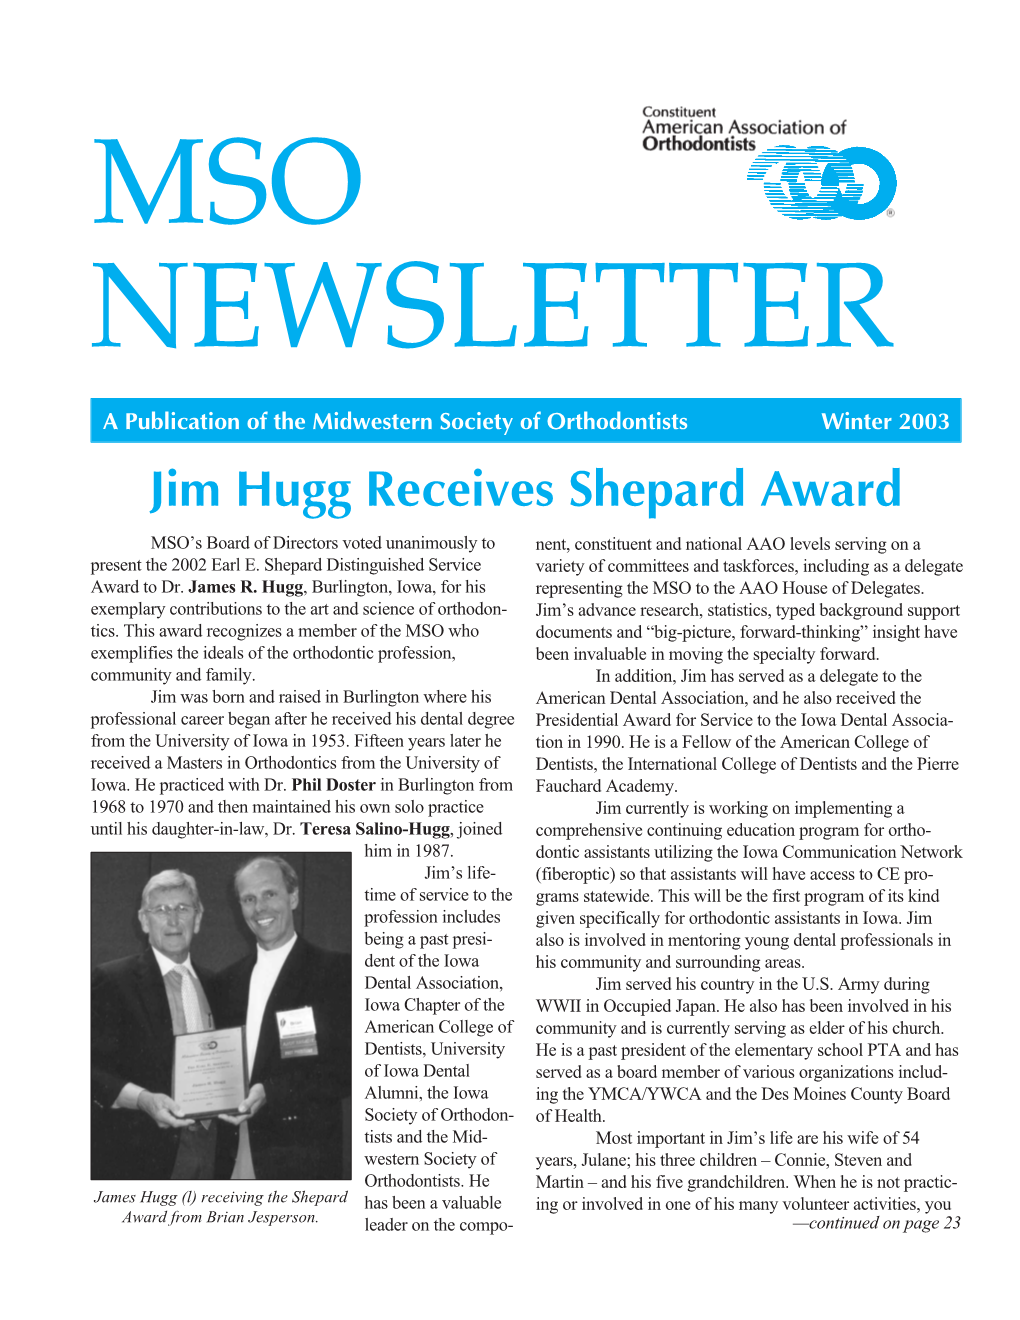 Jim Hugg Receives Shepard Award MSO’S Board of Directors Voted Unanimously to Nent, Constituent and National AAO Levels Serving on a Present the 2002 Earl E